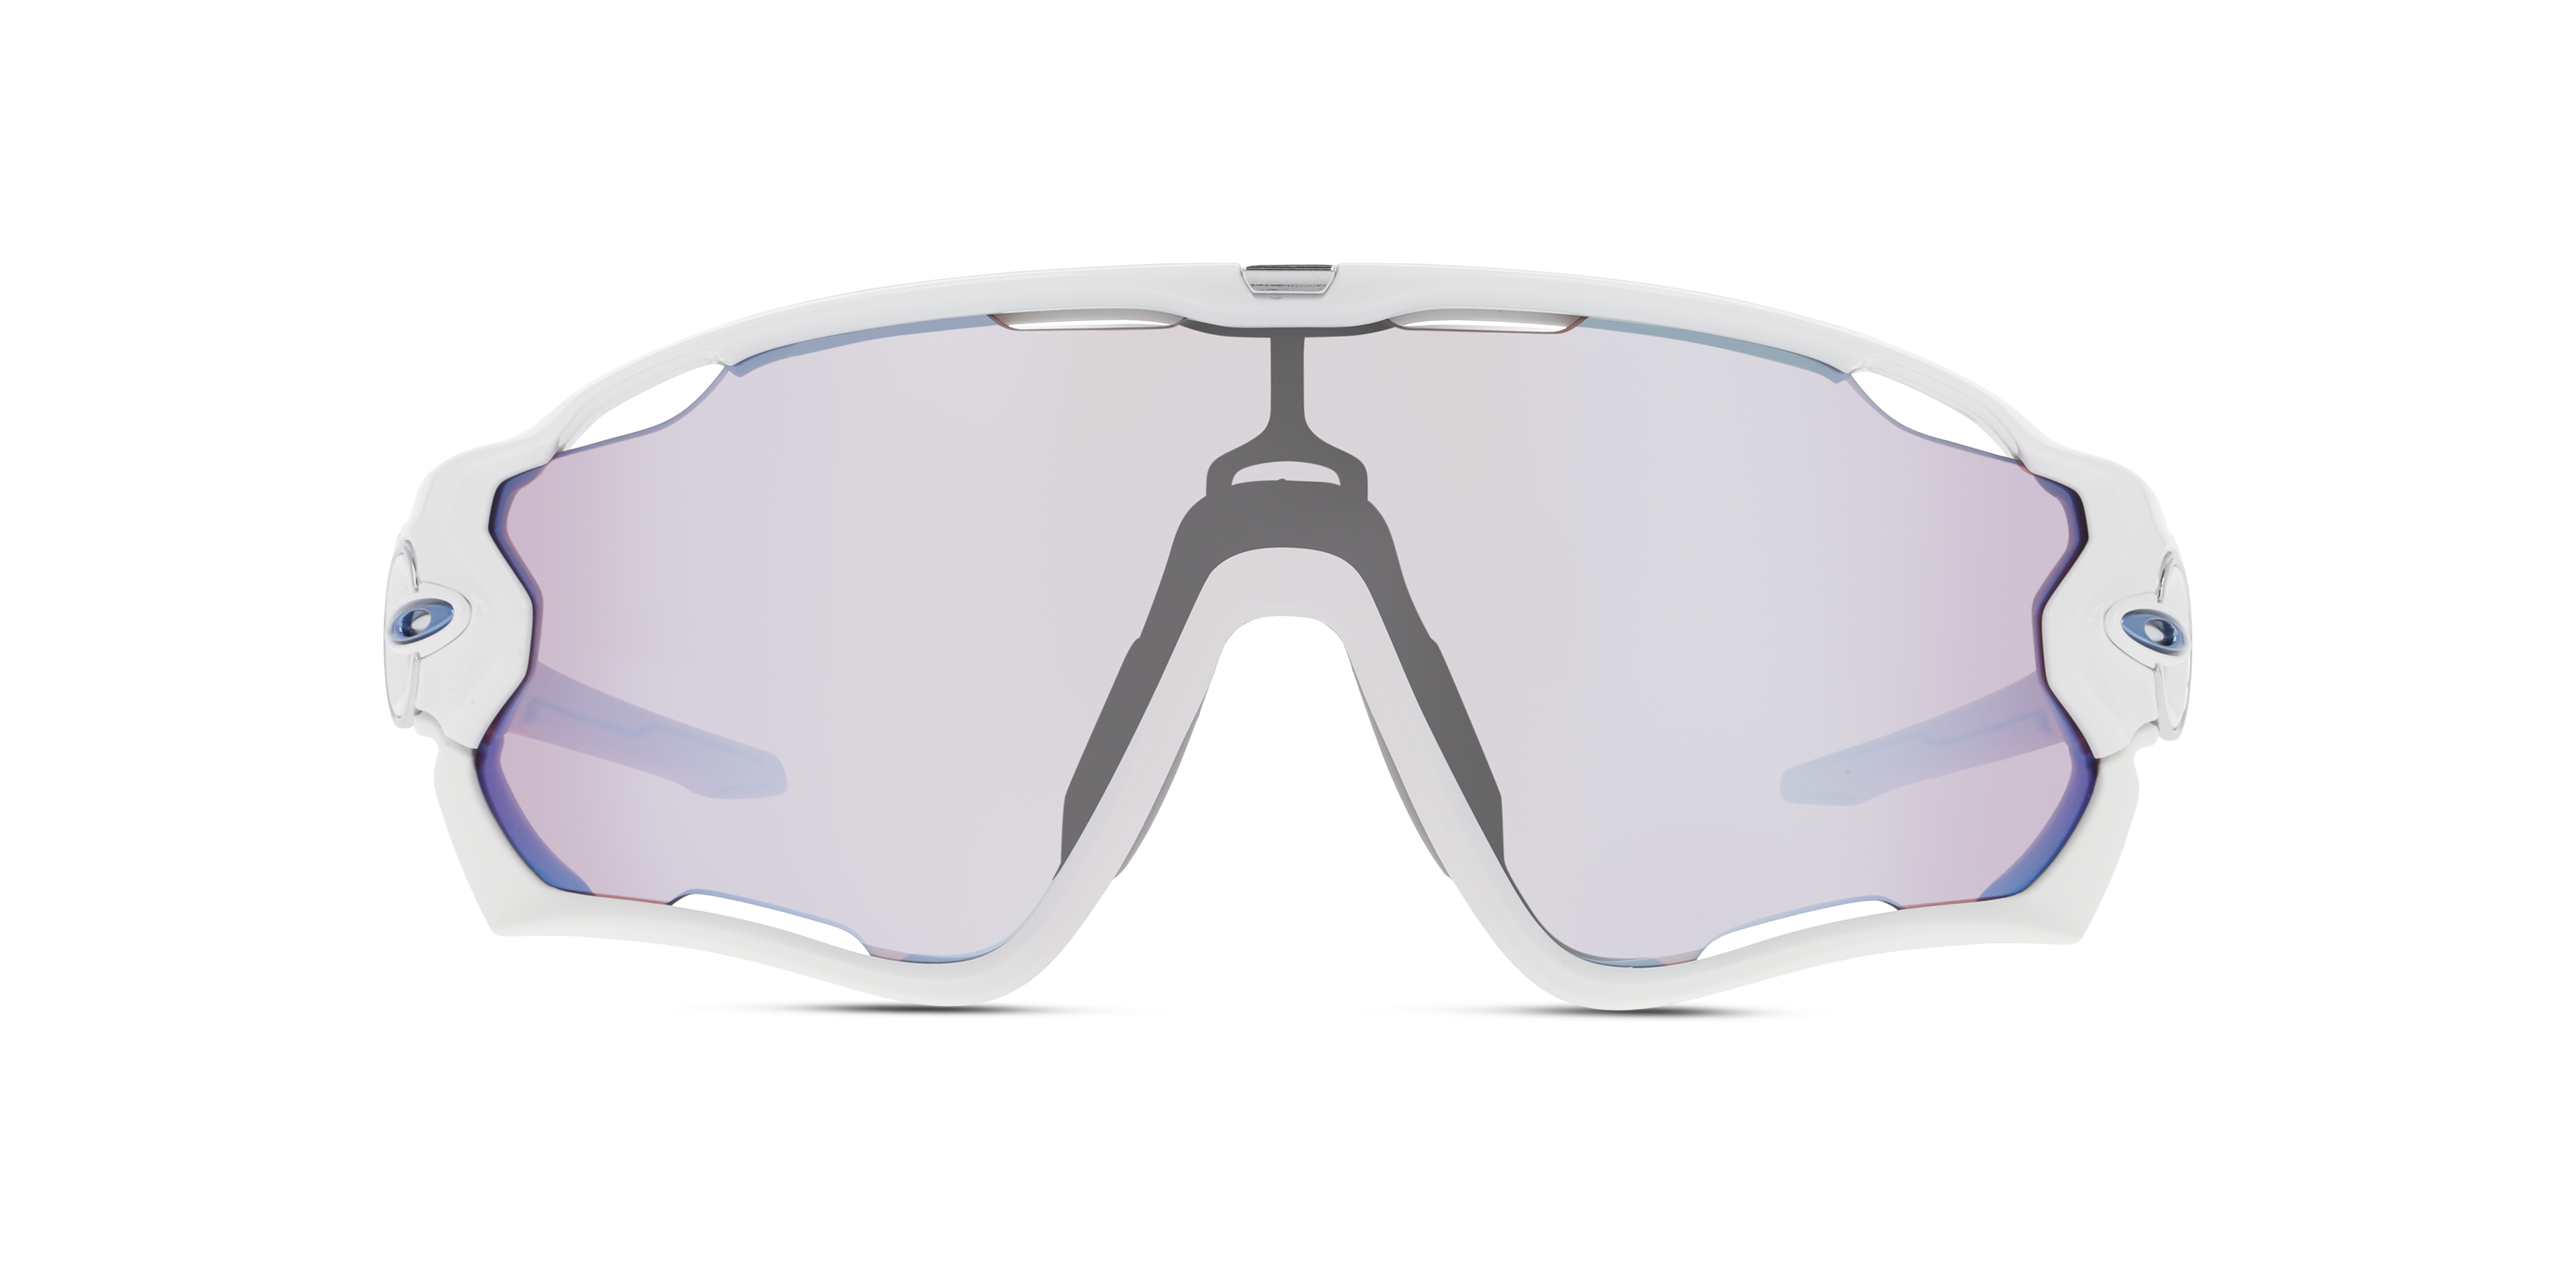 [products.image.front] Oakley 0OO9290 929021